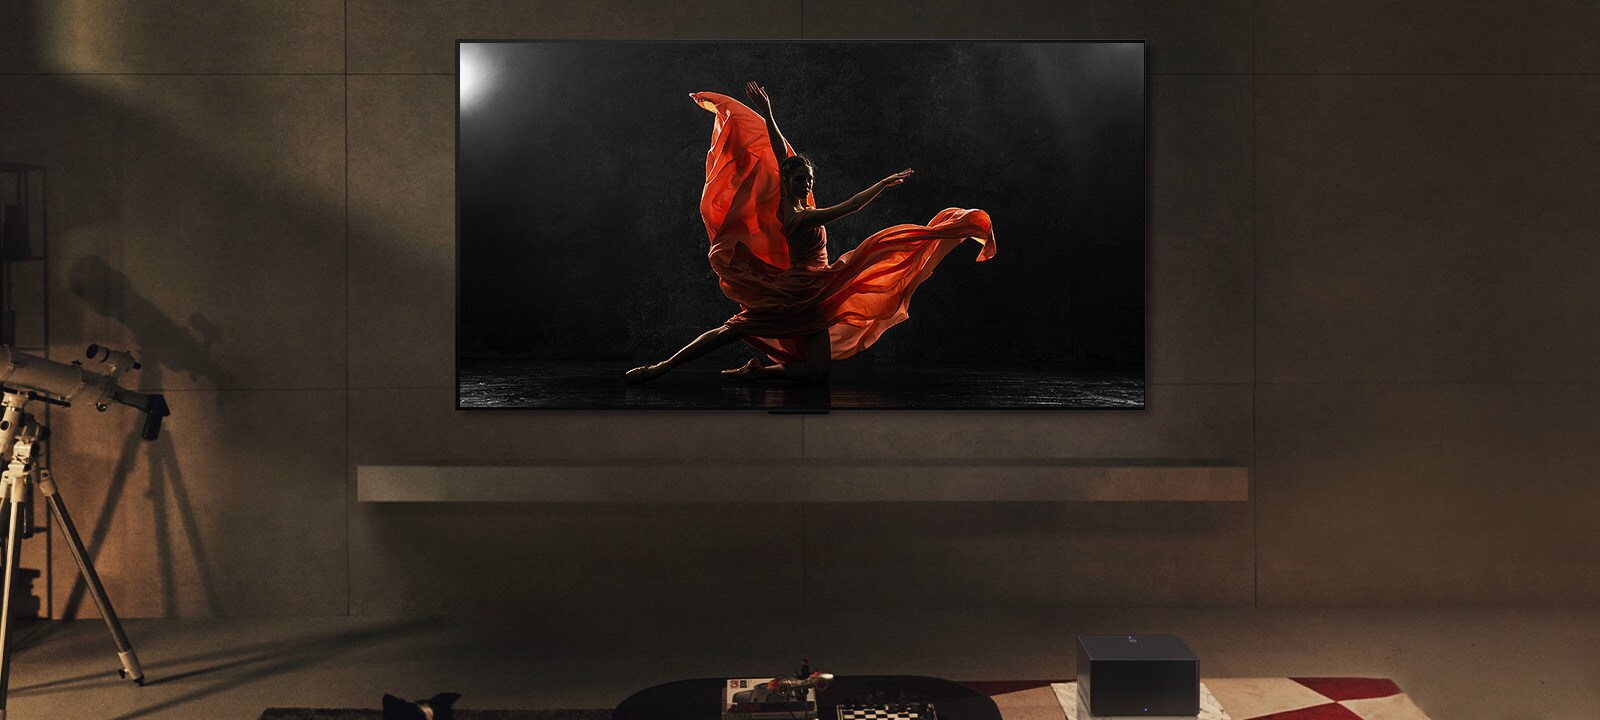 LG SIGNATURE OLED M4 and LG Soundbar in a modern living space in nighttime. The screen image of a dancer on a dark stage is displayed with the ideal brightness levels.